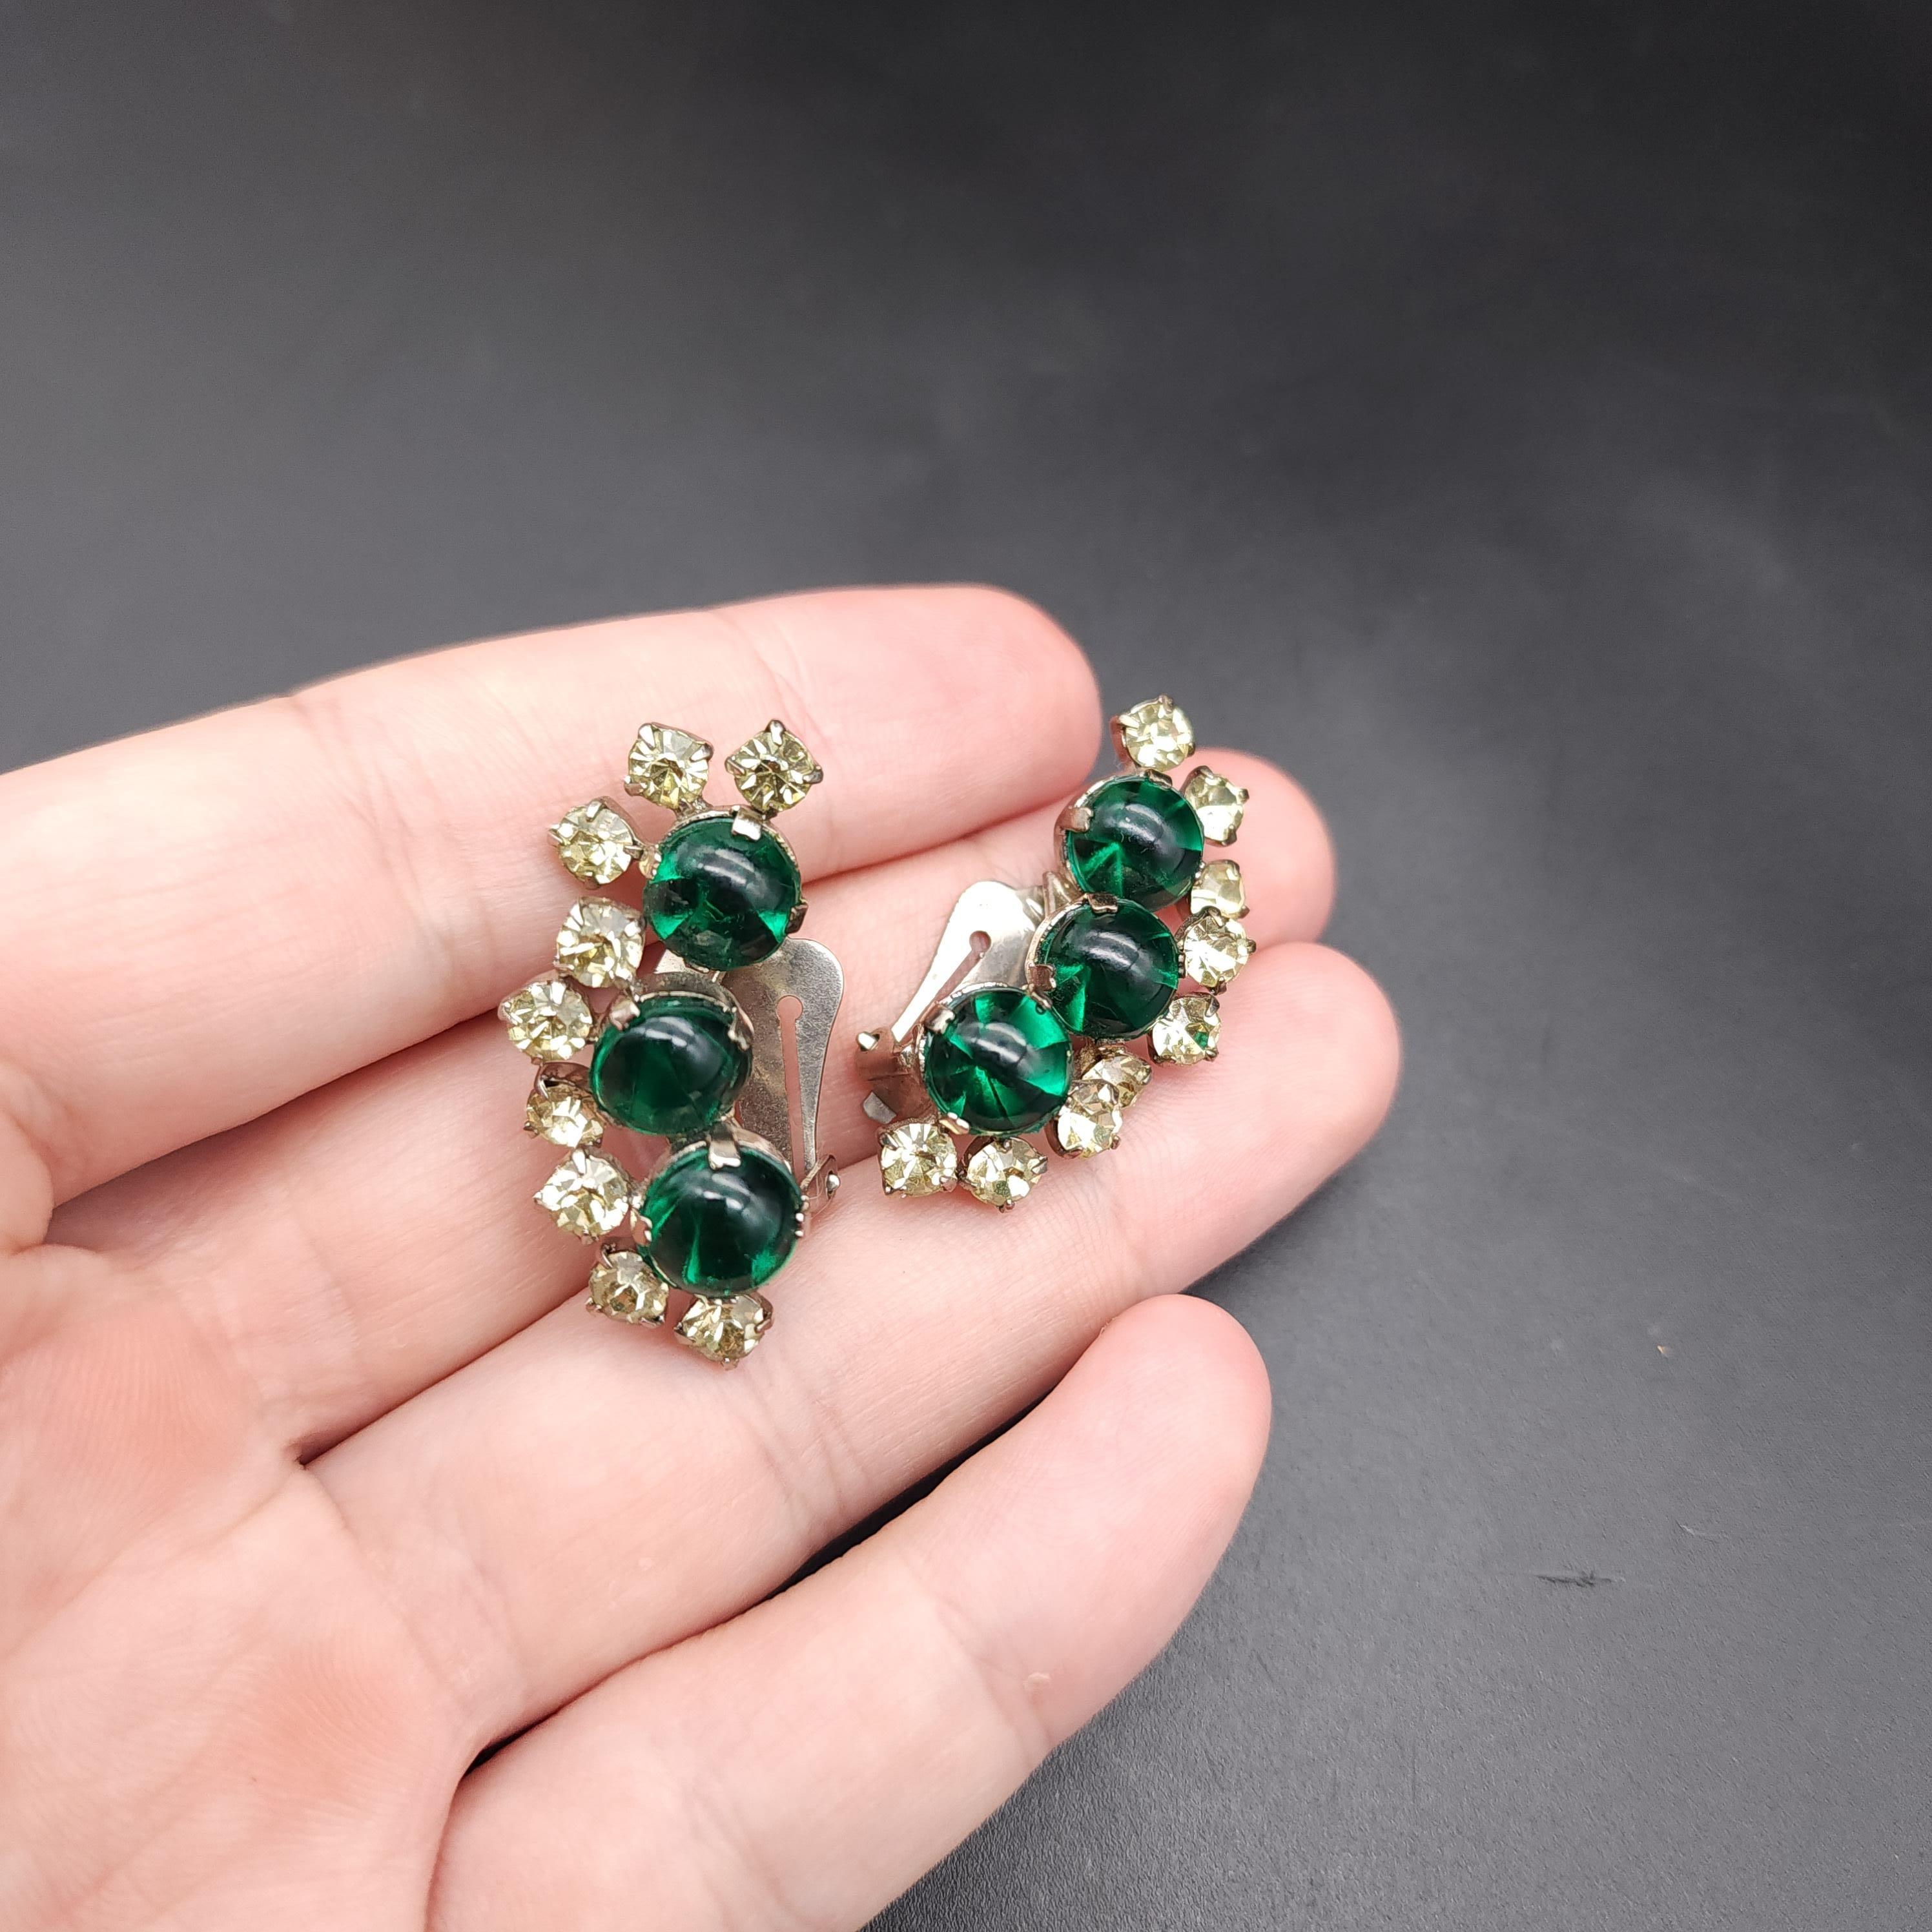 Emerald Crystal Cabochon Clip On Earrings, Clear Crystal Accents, Silver Tone In Excellent Condition For Sale In Milford, DE